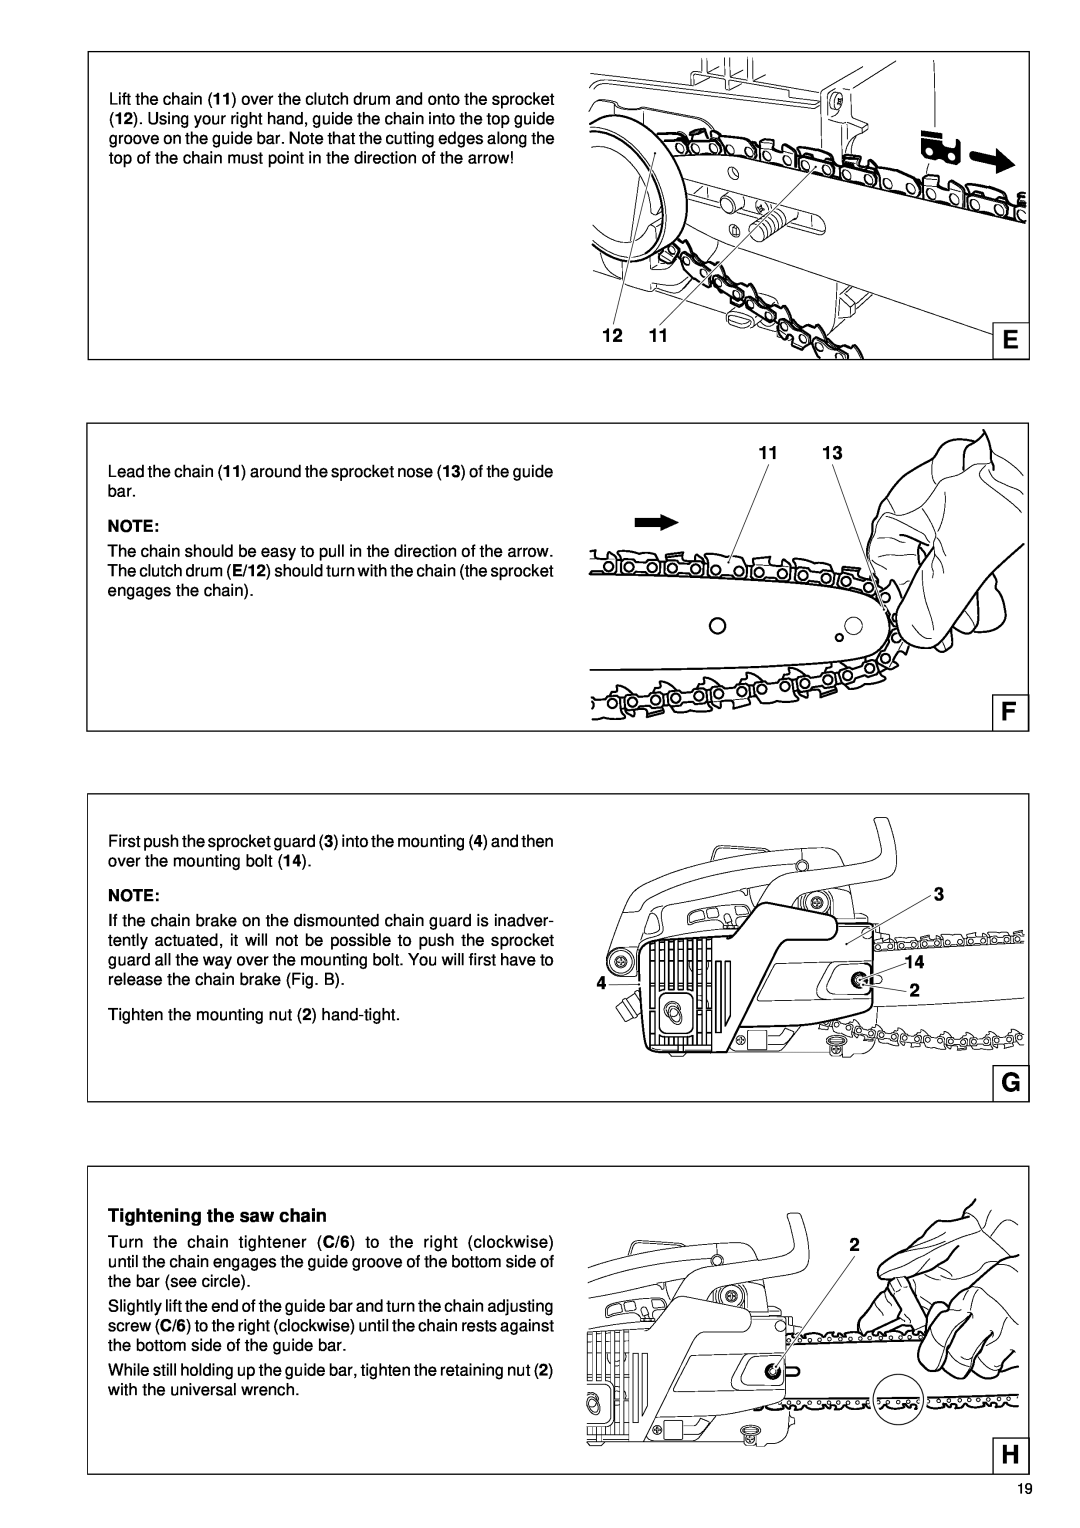 Makita DCS 330 TH instruction manual Tightening the saw chain 